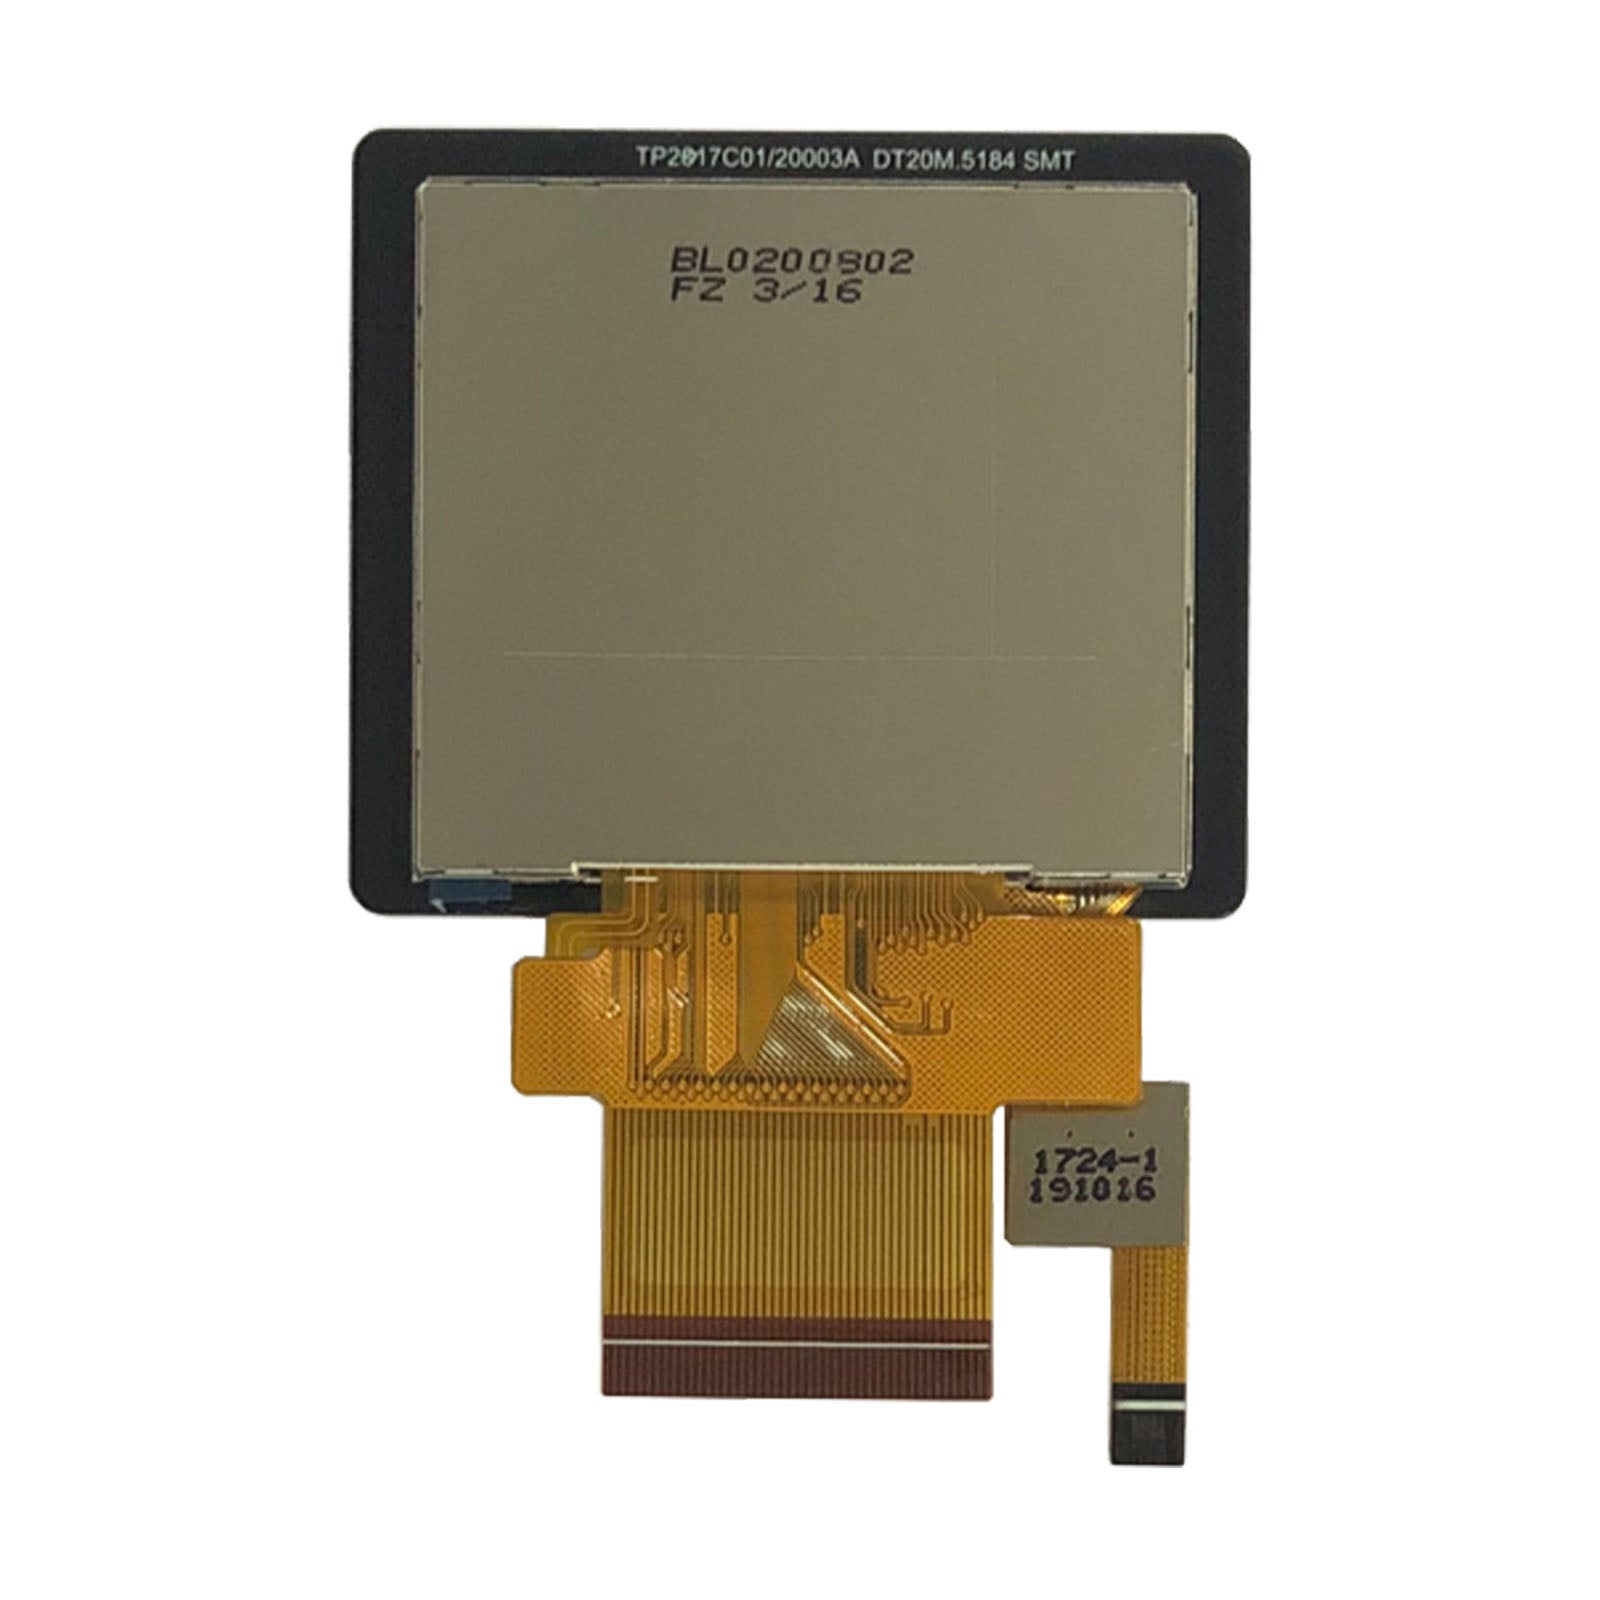 DisplayModule 2.0" 320X240 Transflective Display Panel with Capacitive Touch – MCU/SPI/RGB